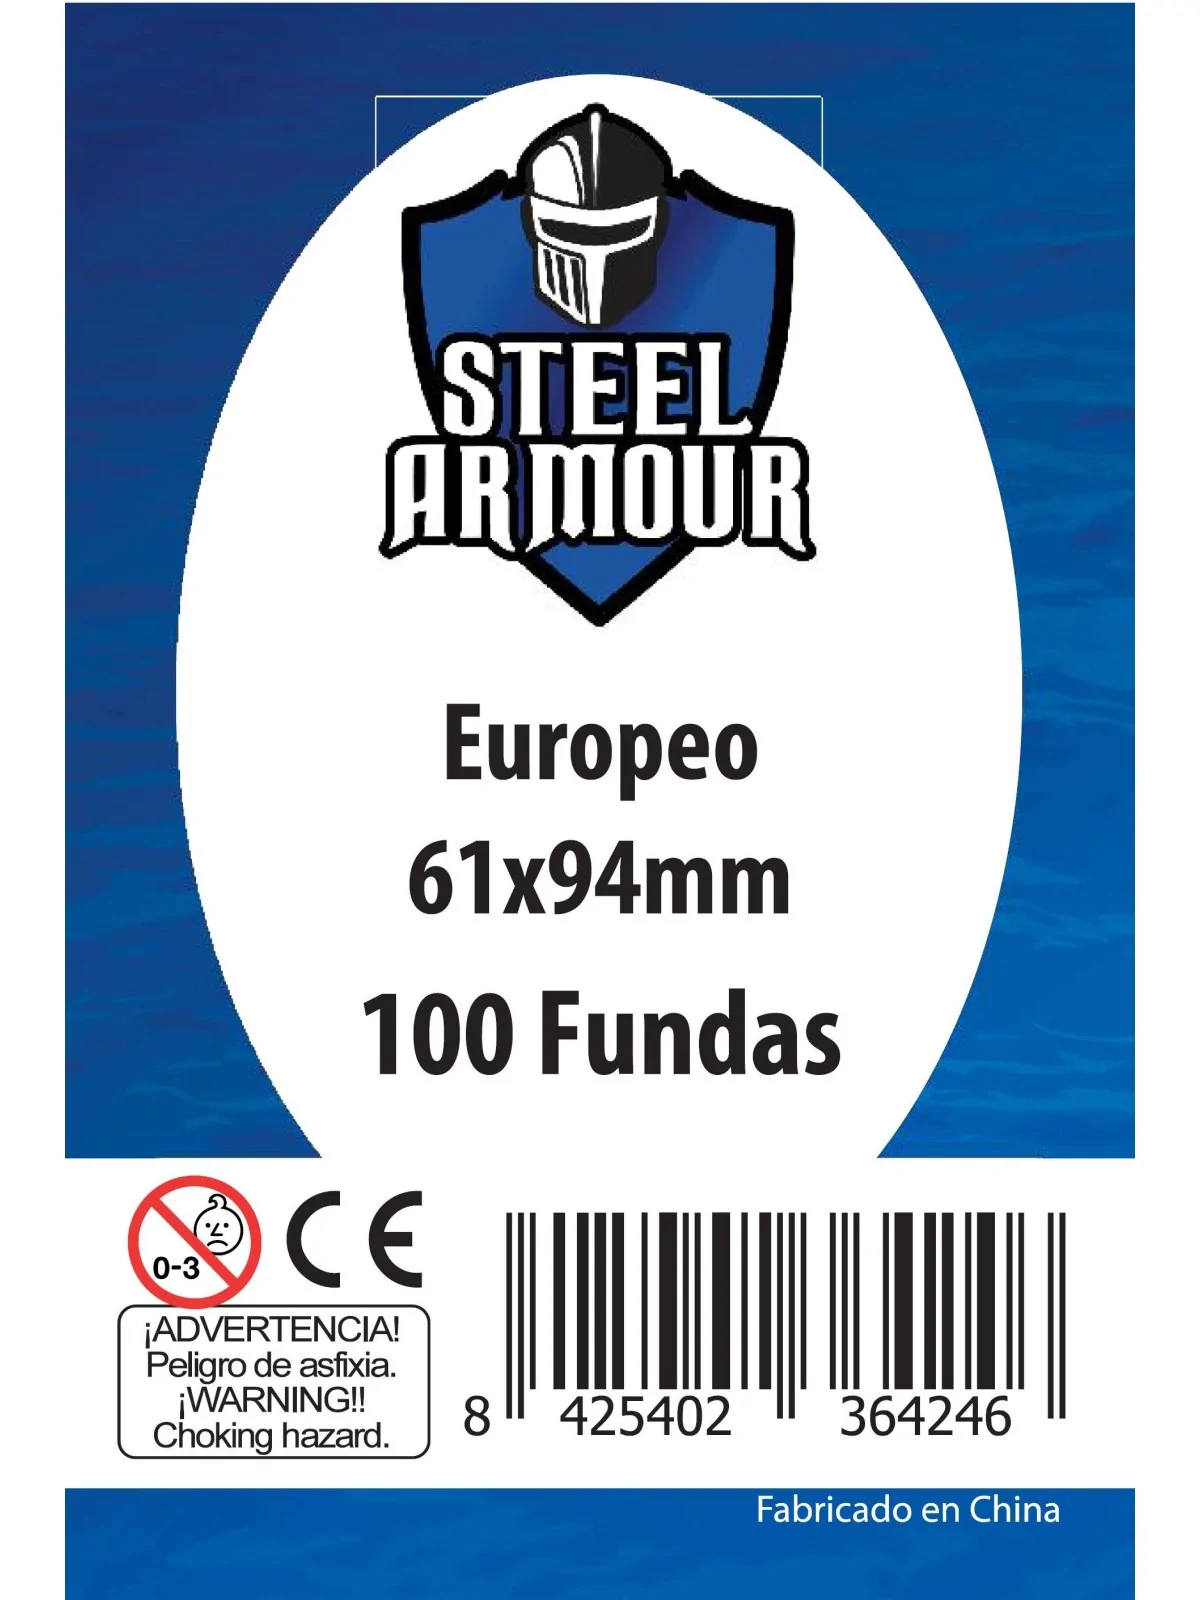 Comprar Steel Armour Europeo (Pack of 100) (61x94mm) barato al mejor p